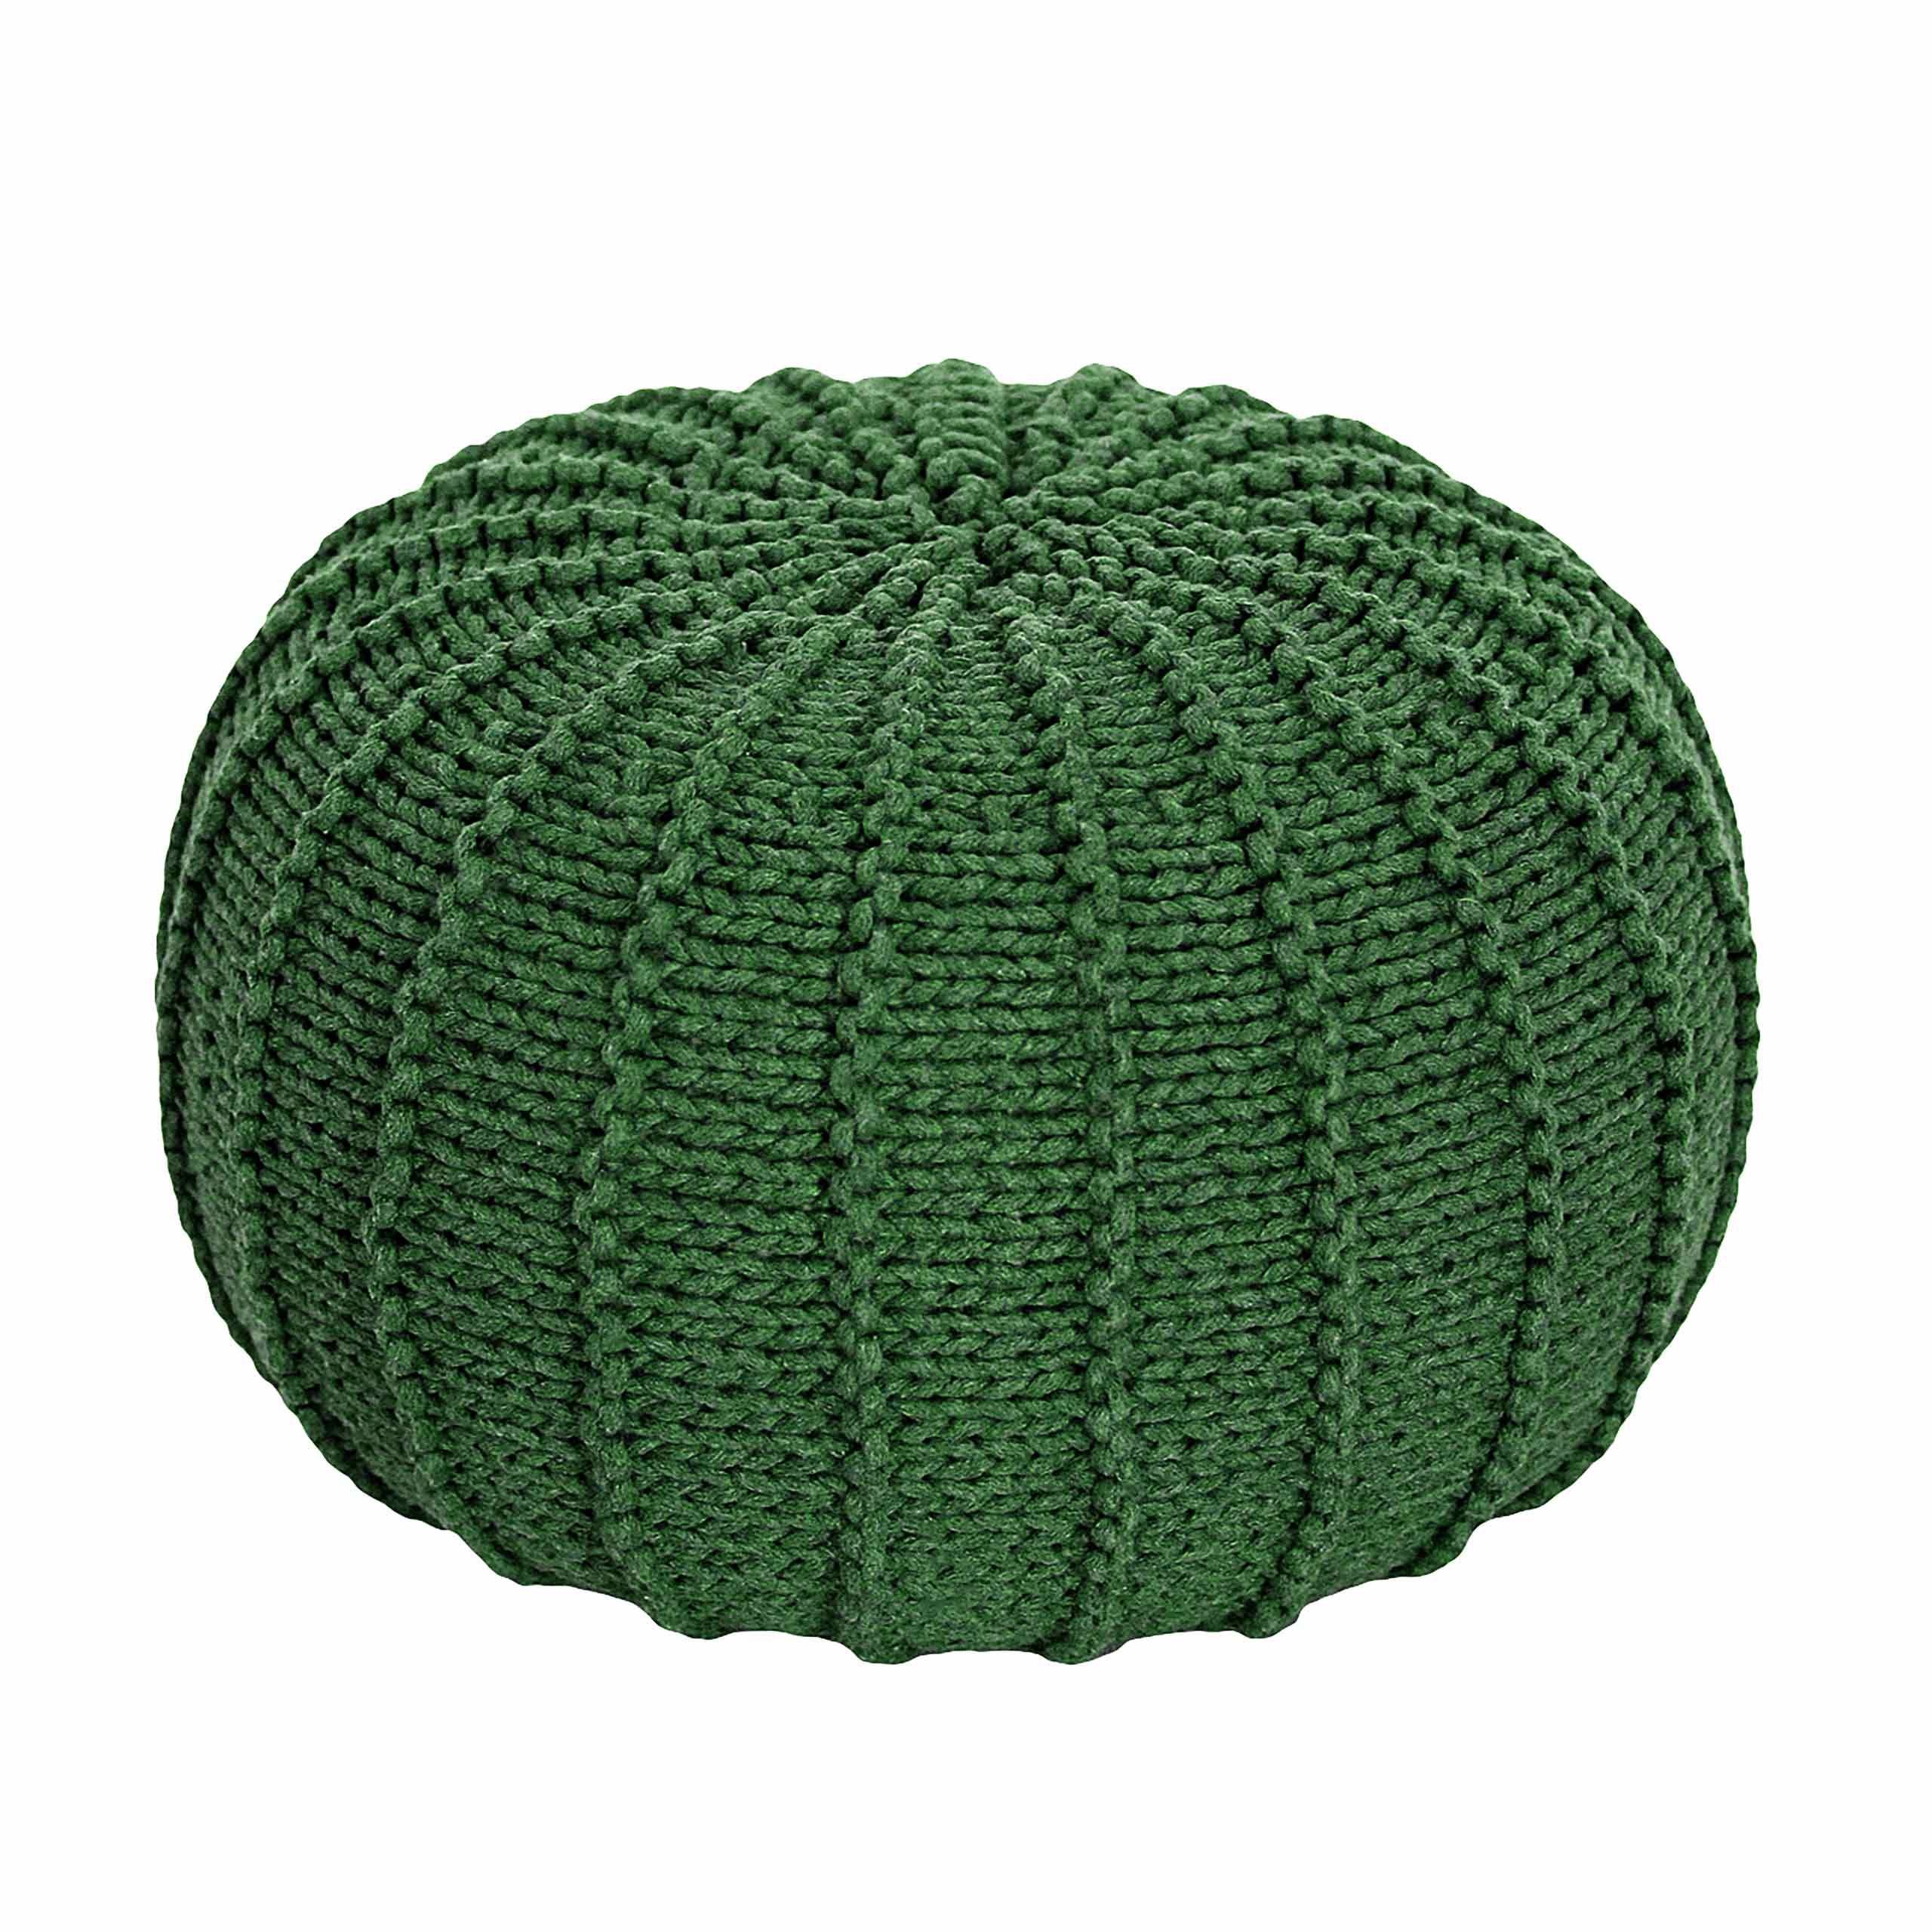 Knitted pouffe, Small | AVOCADO